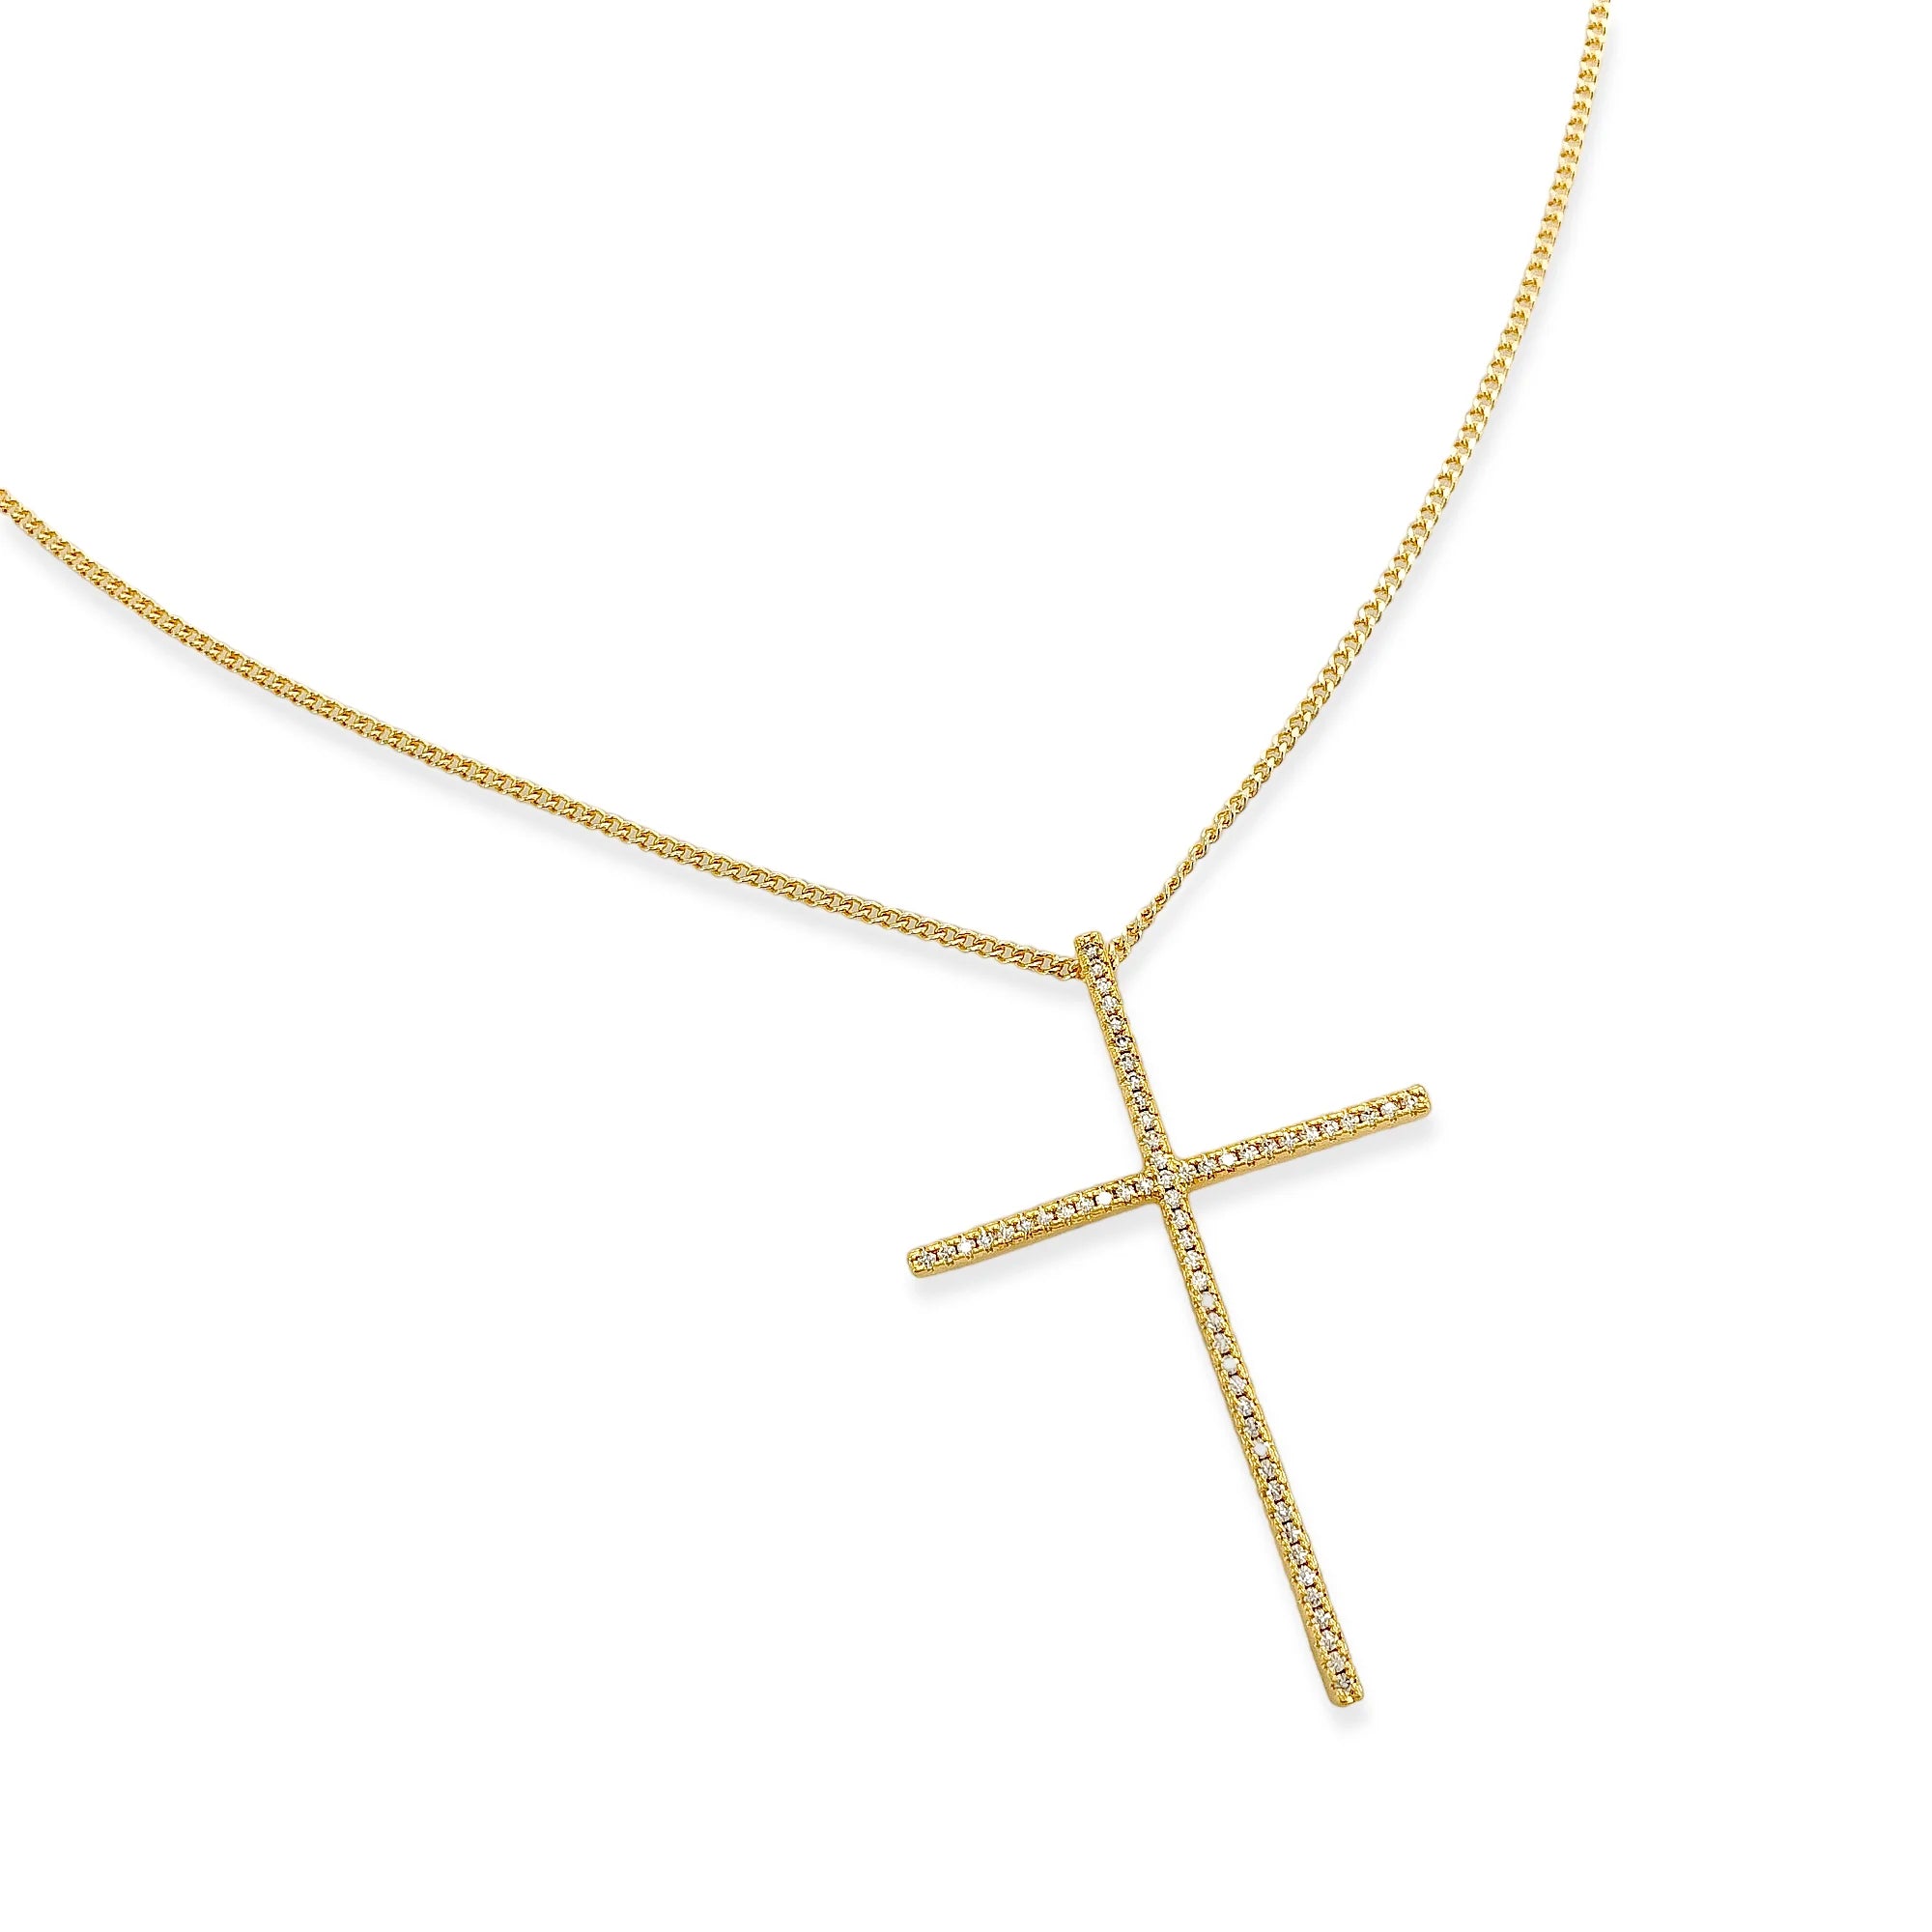 ANK418 - Cross Chain Necklace